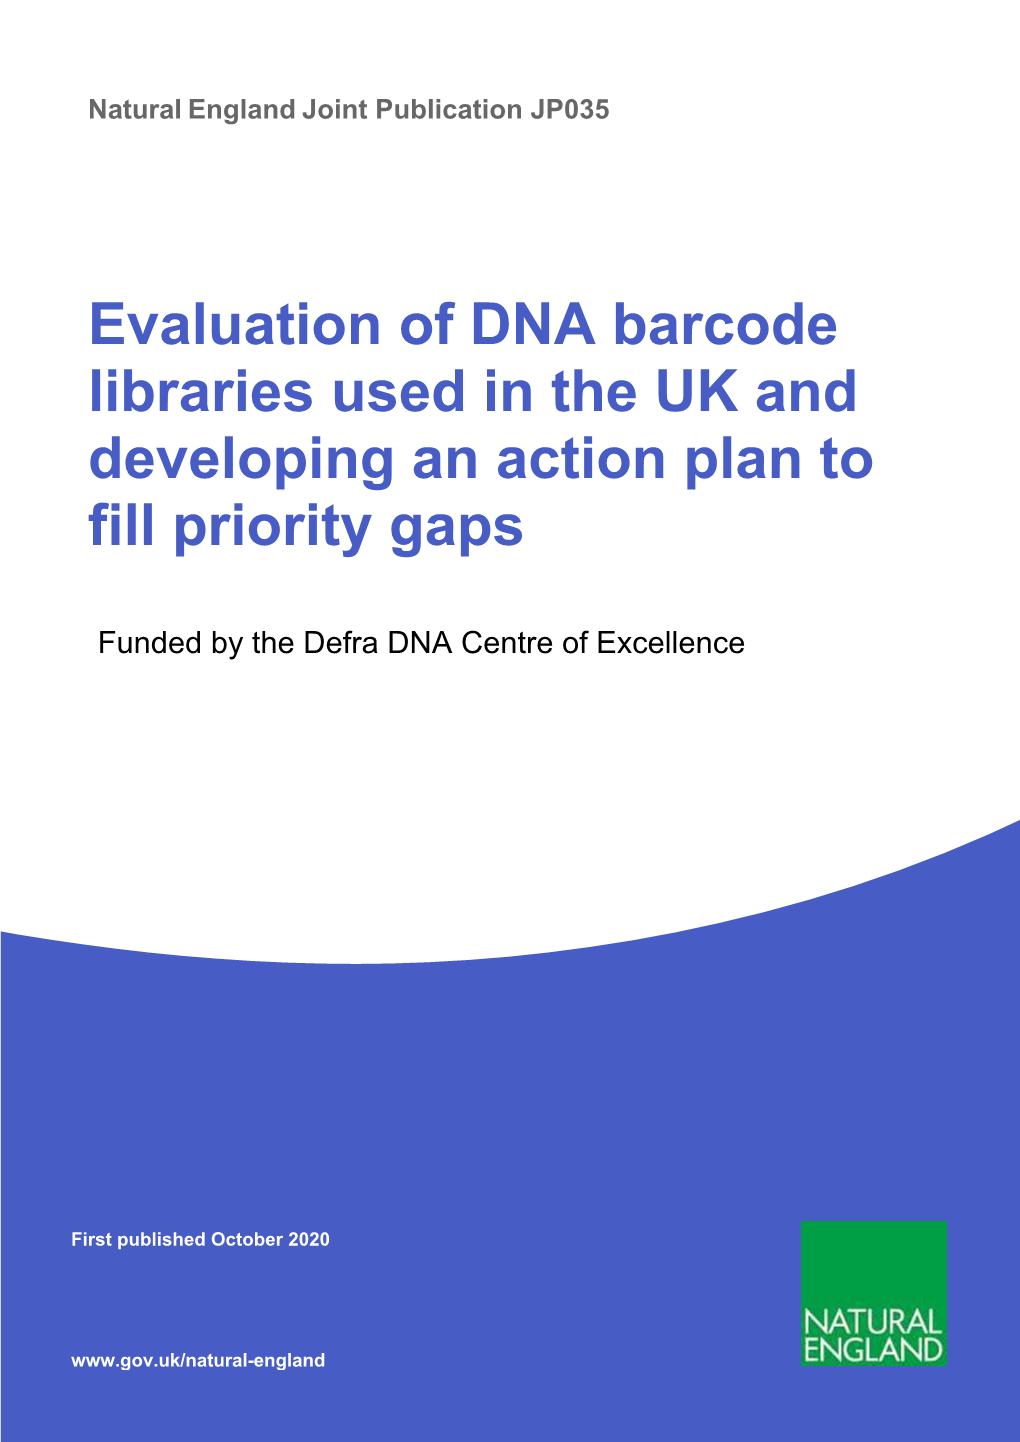 Evaluation of DNA Barcode Libraries Used in the UK and Developing an Action Plan to Fill Priority Gaps